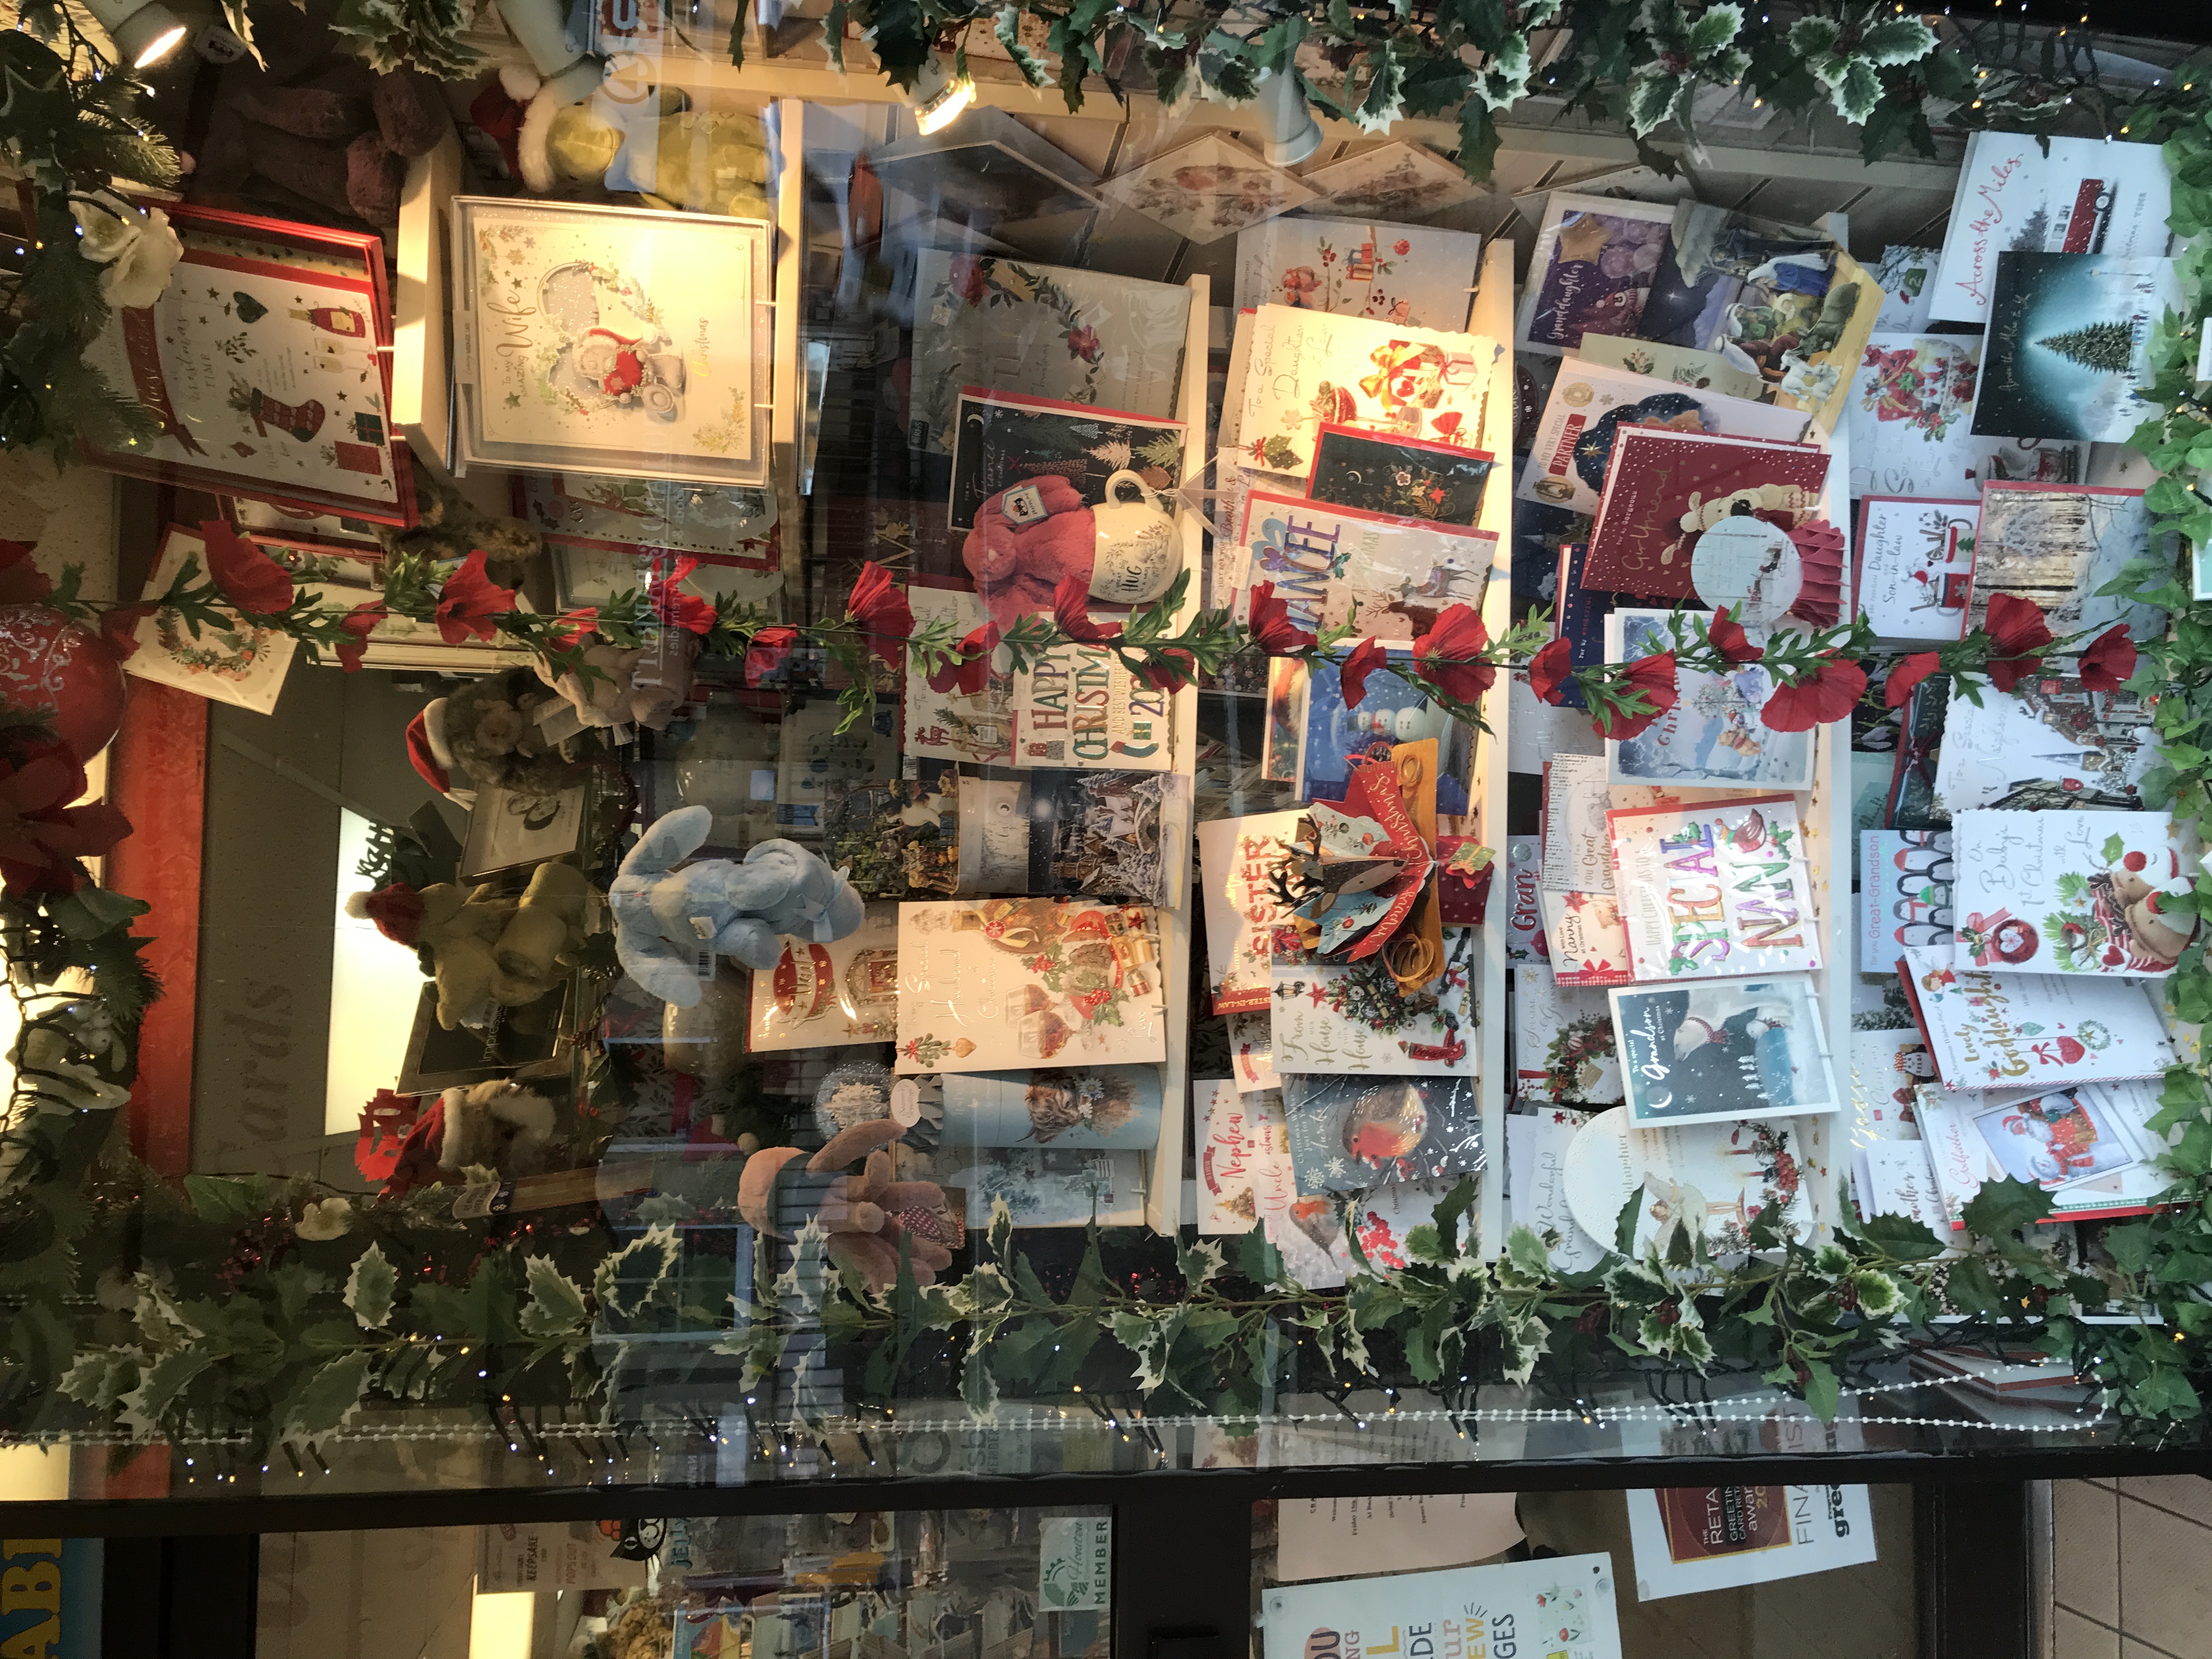 Above: The Just Cards windows are festooned with Christmas cards.